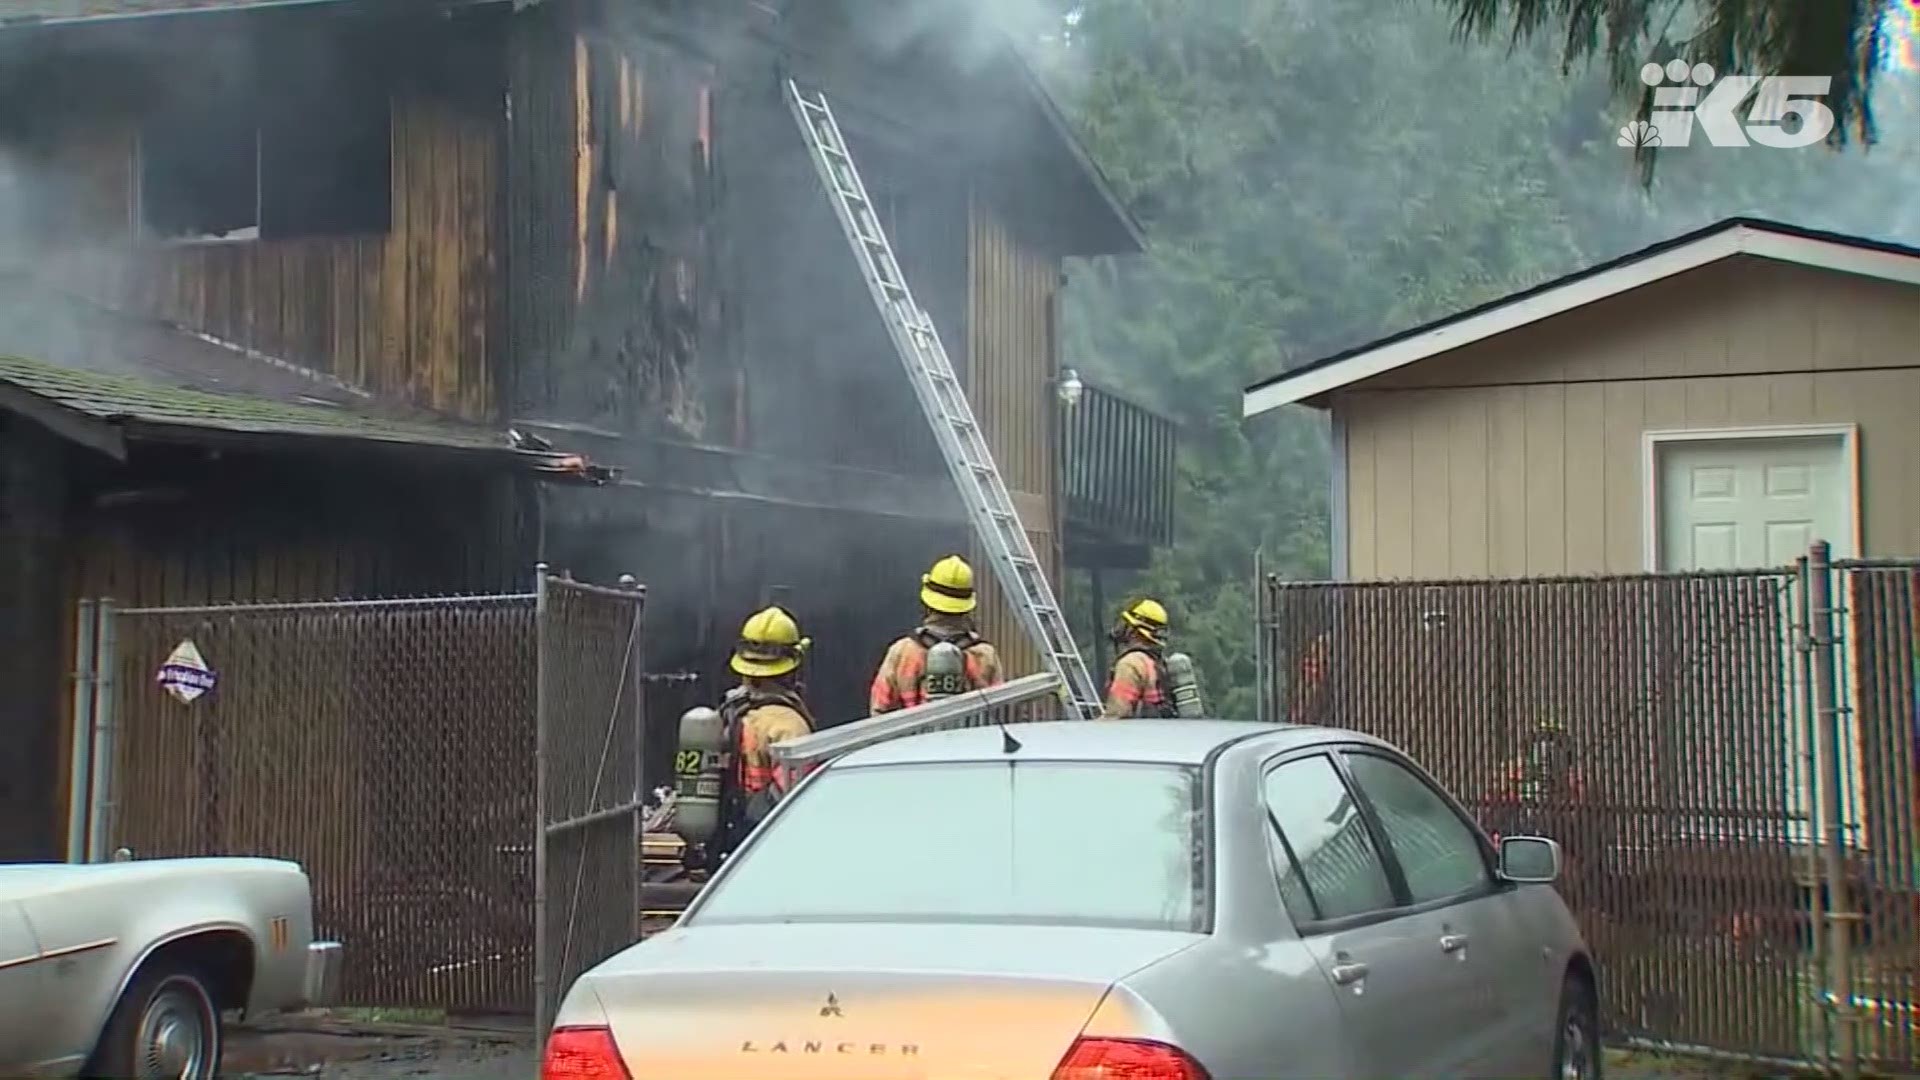 A home where an 85-year-old woman assaulted her roommates caught fire on Dec. 30.